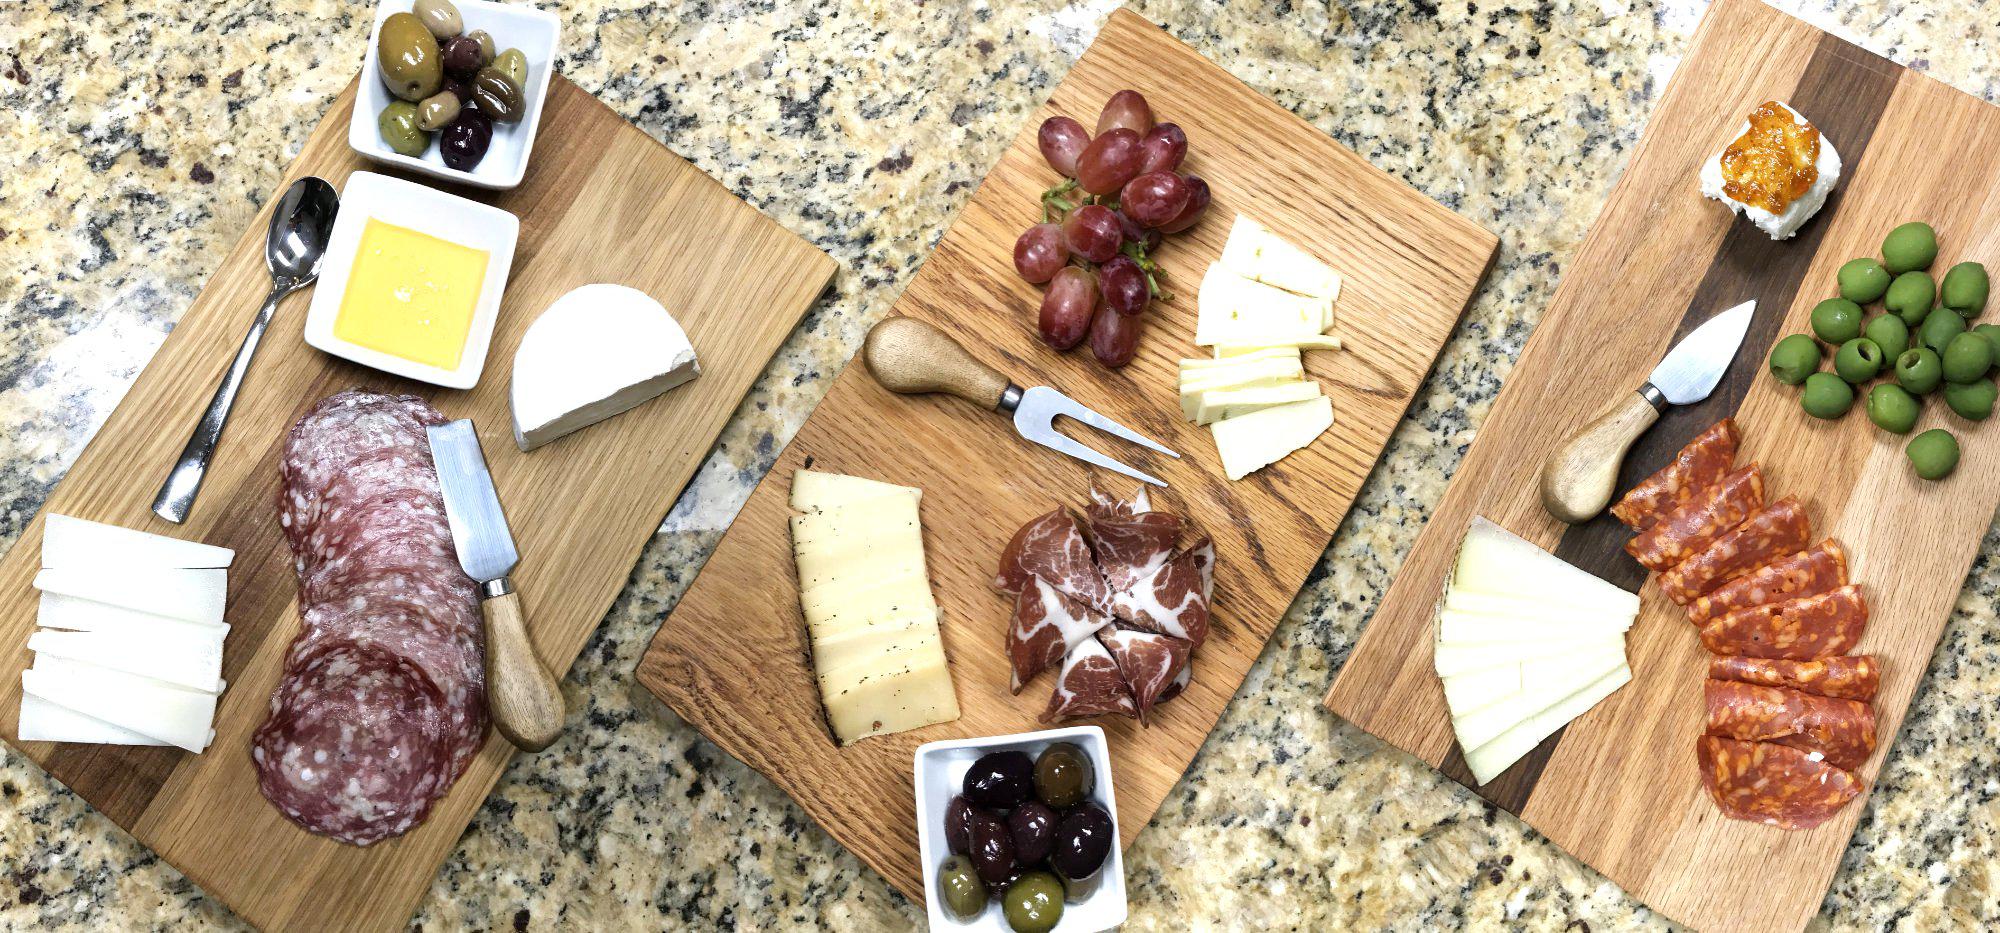 How to Host a Memorable Wine and Cheese Party